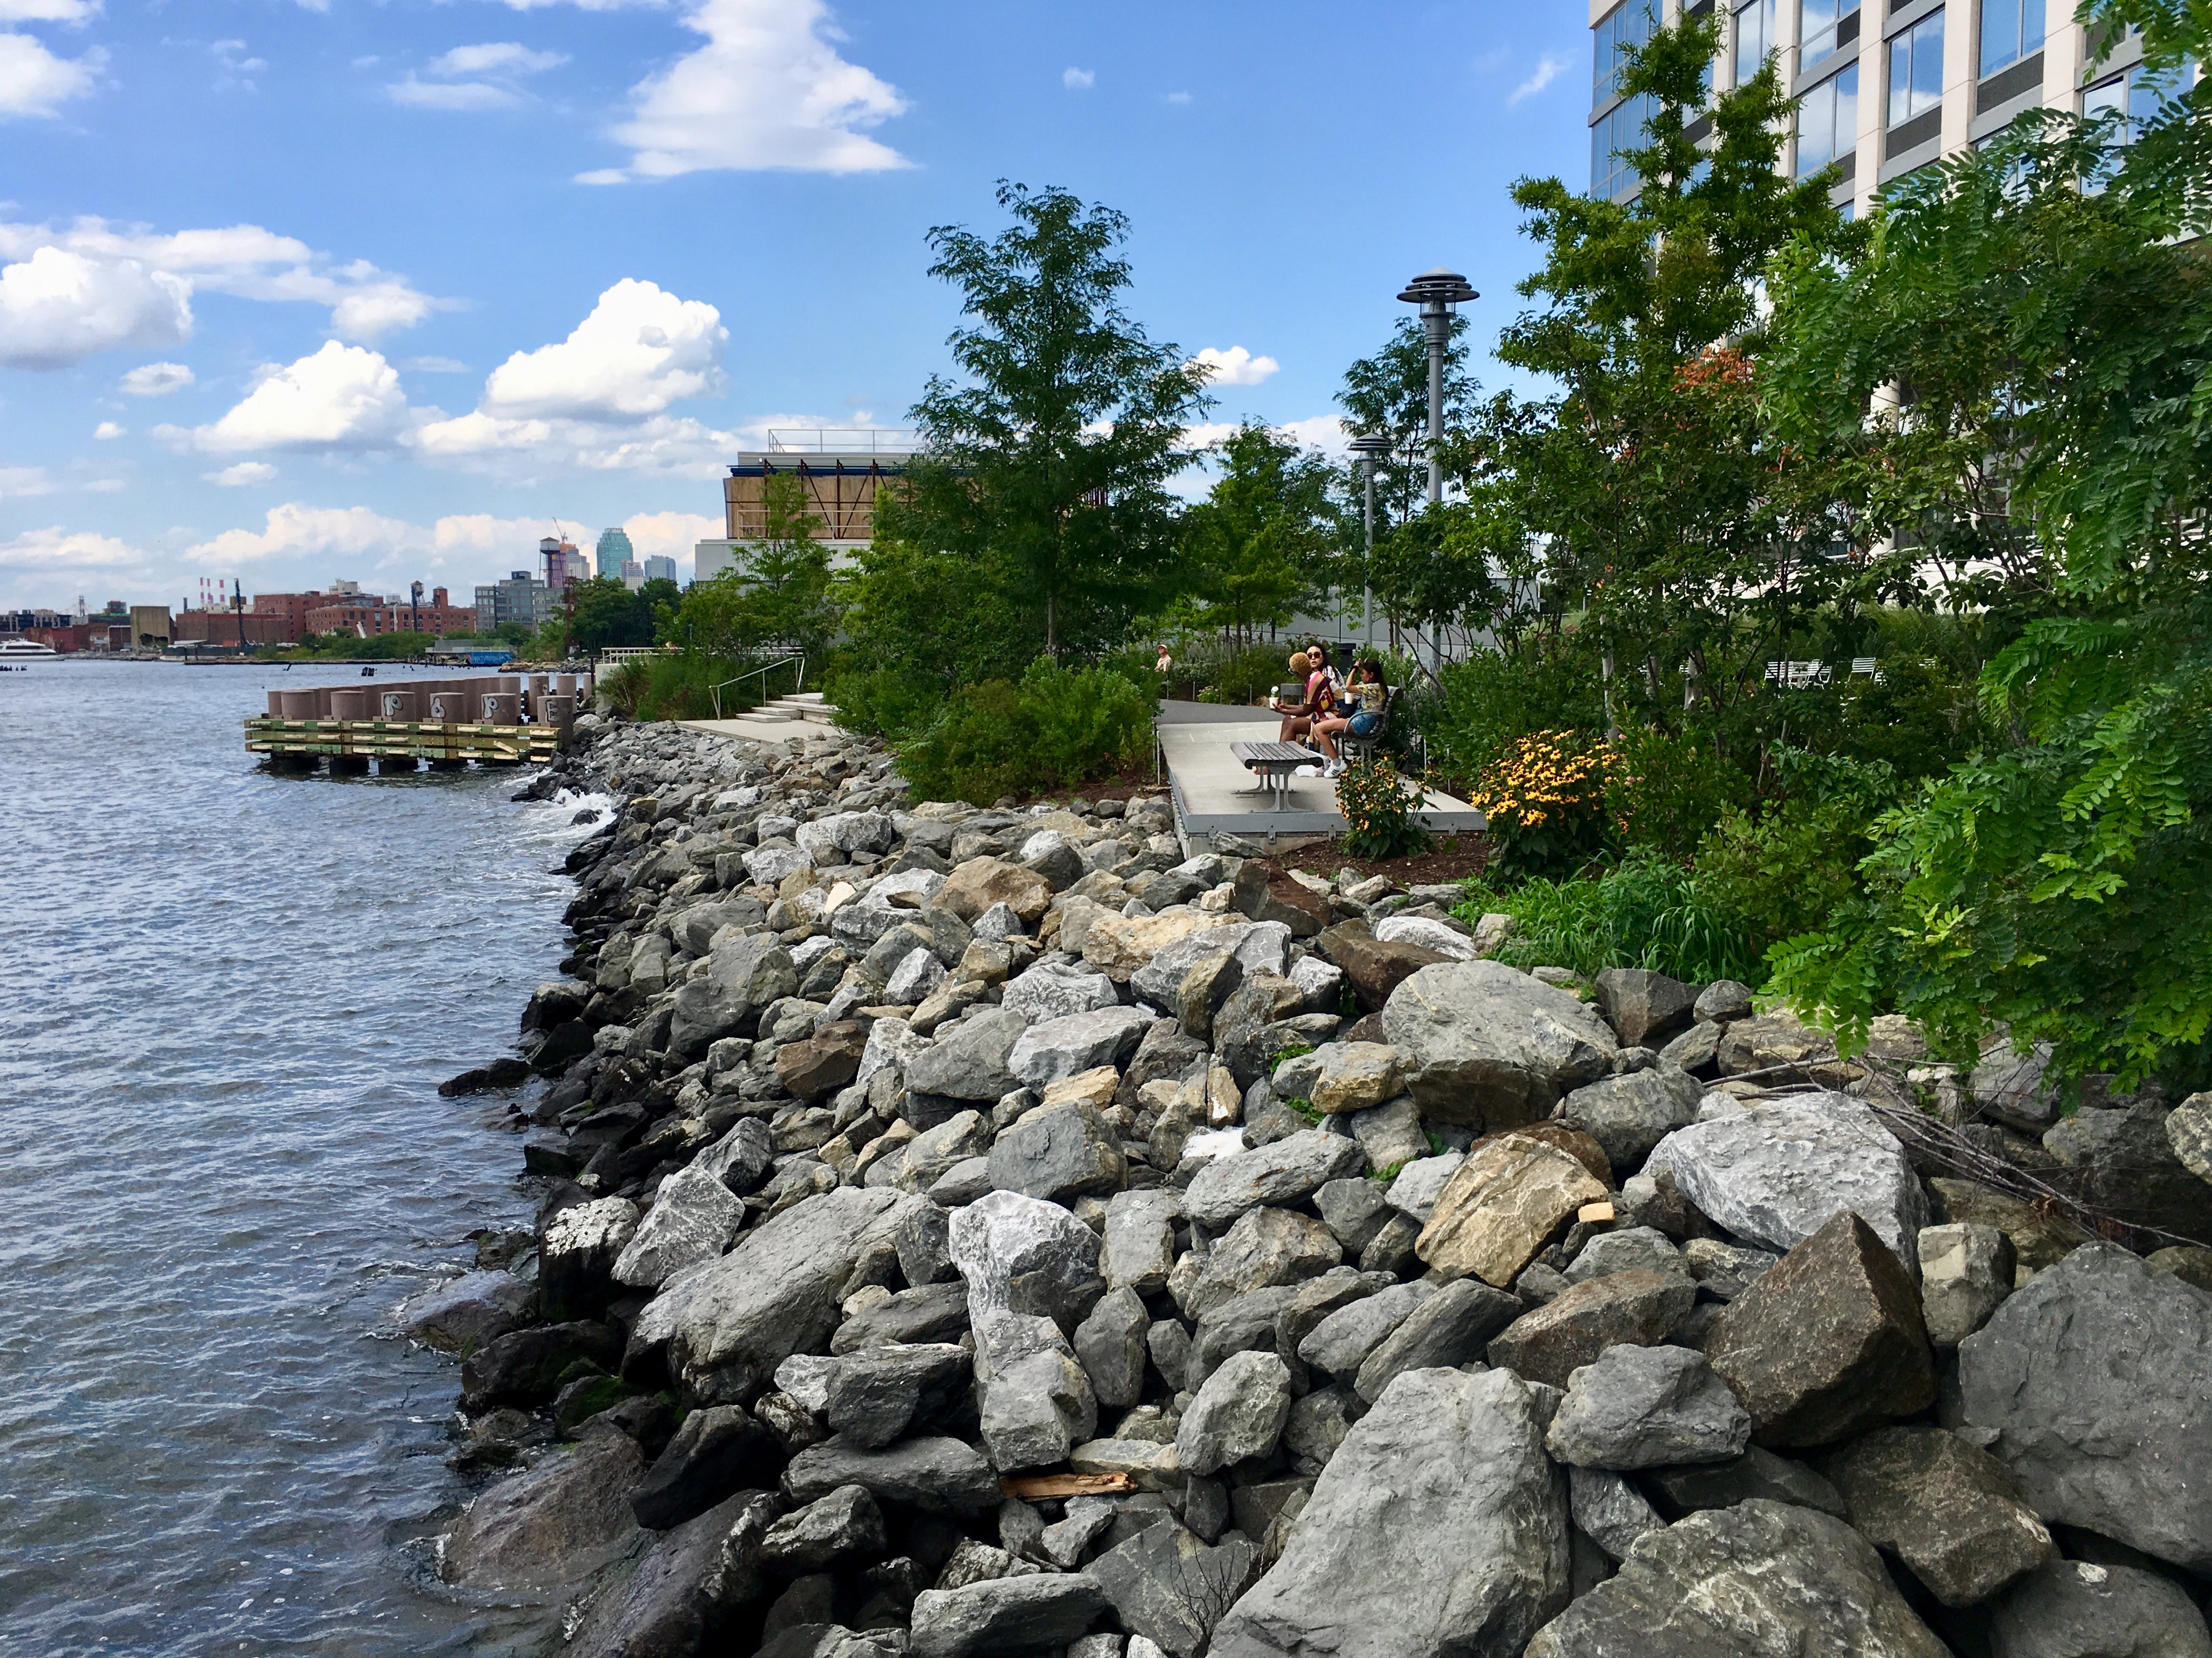 Boulders create a barrier between the lapping waters of the East River and the public space behind Level BK. Eagle photo by Lore Croghan